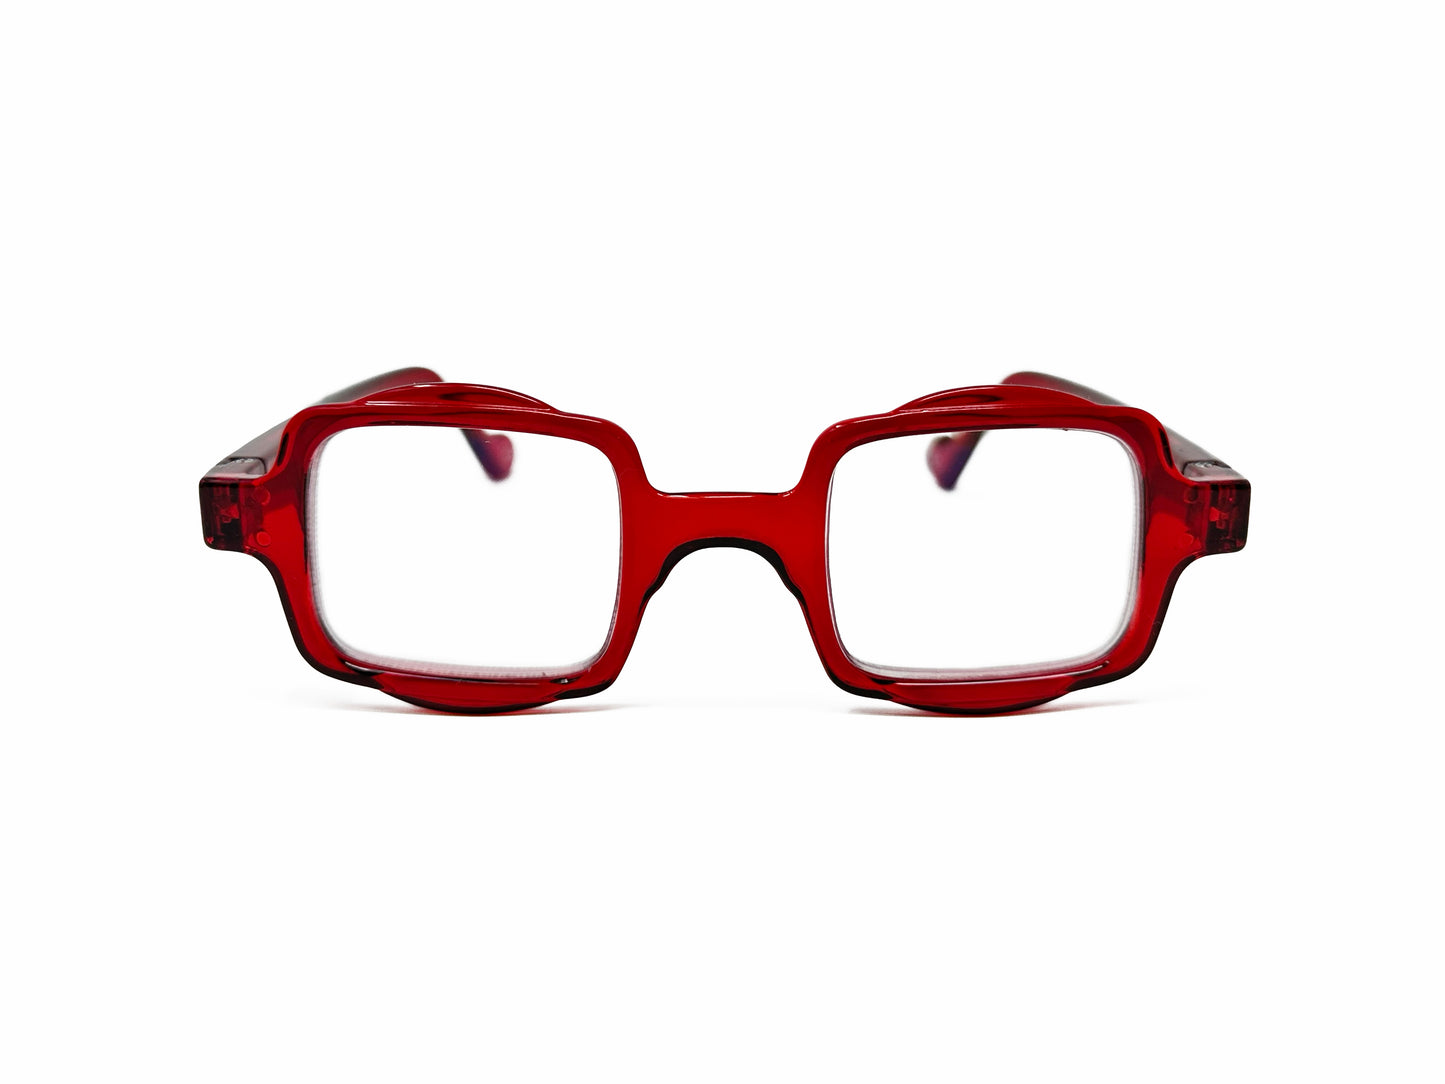 Aptica square reading glass with half-circle shape on top and bottom . Model: Hive. Color: Royal Red - Semi-transparent. Front view.